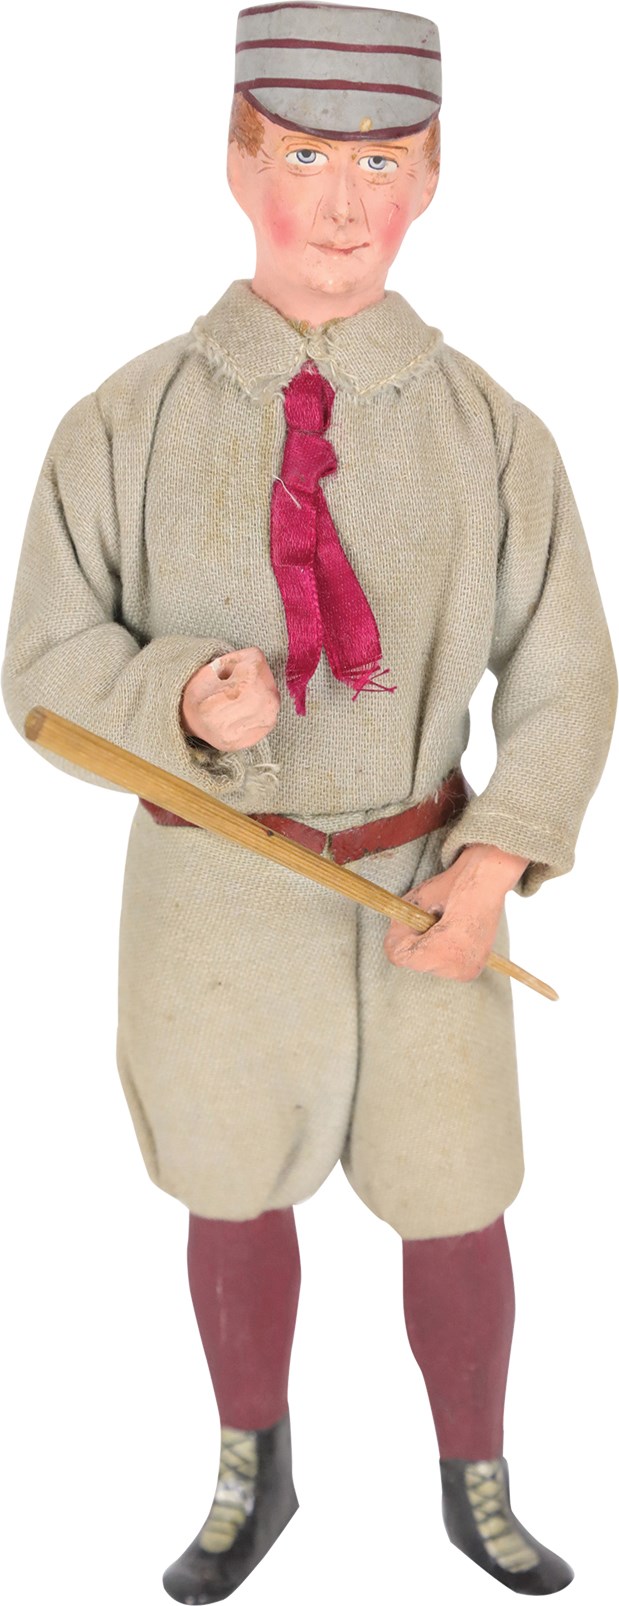 - Circa 1880s Baseball Candy Container Doll